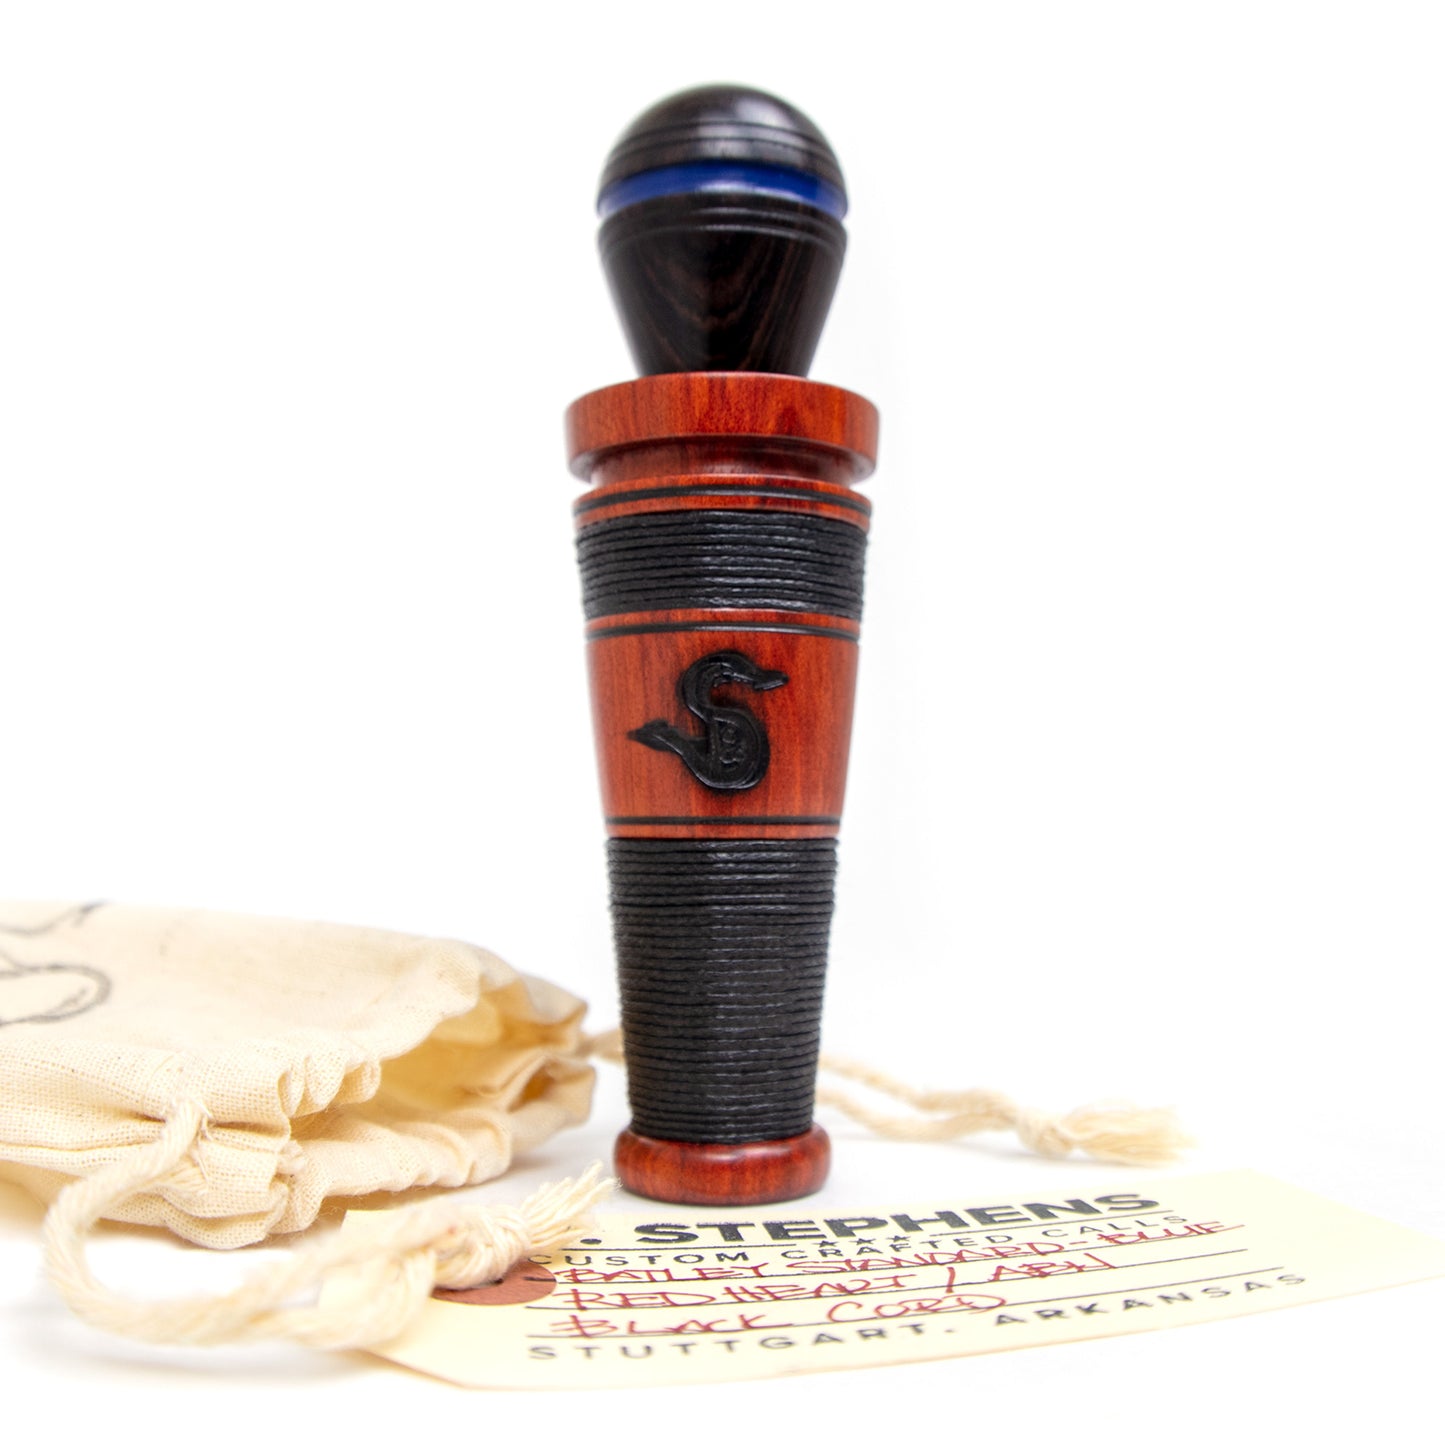 RNT Auction No. 3 - The Batley Standard Duck Call by John Stephens